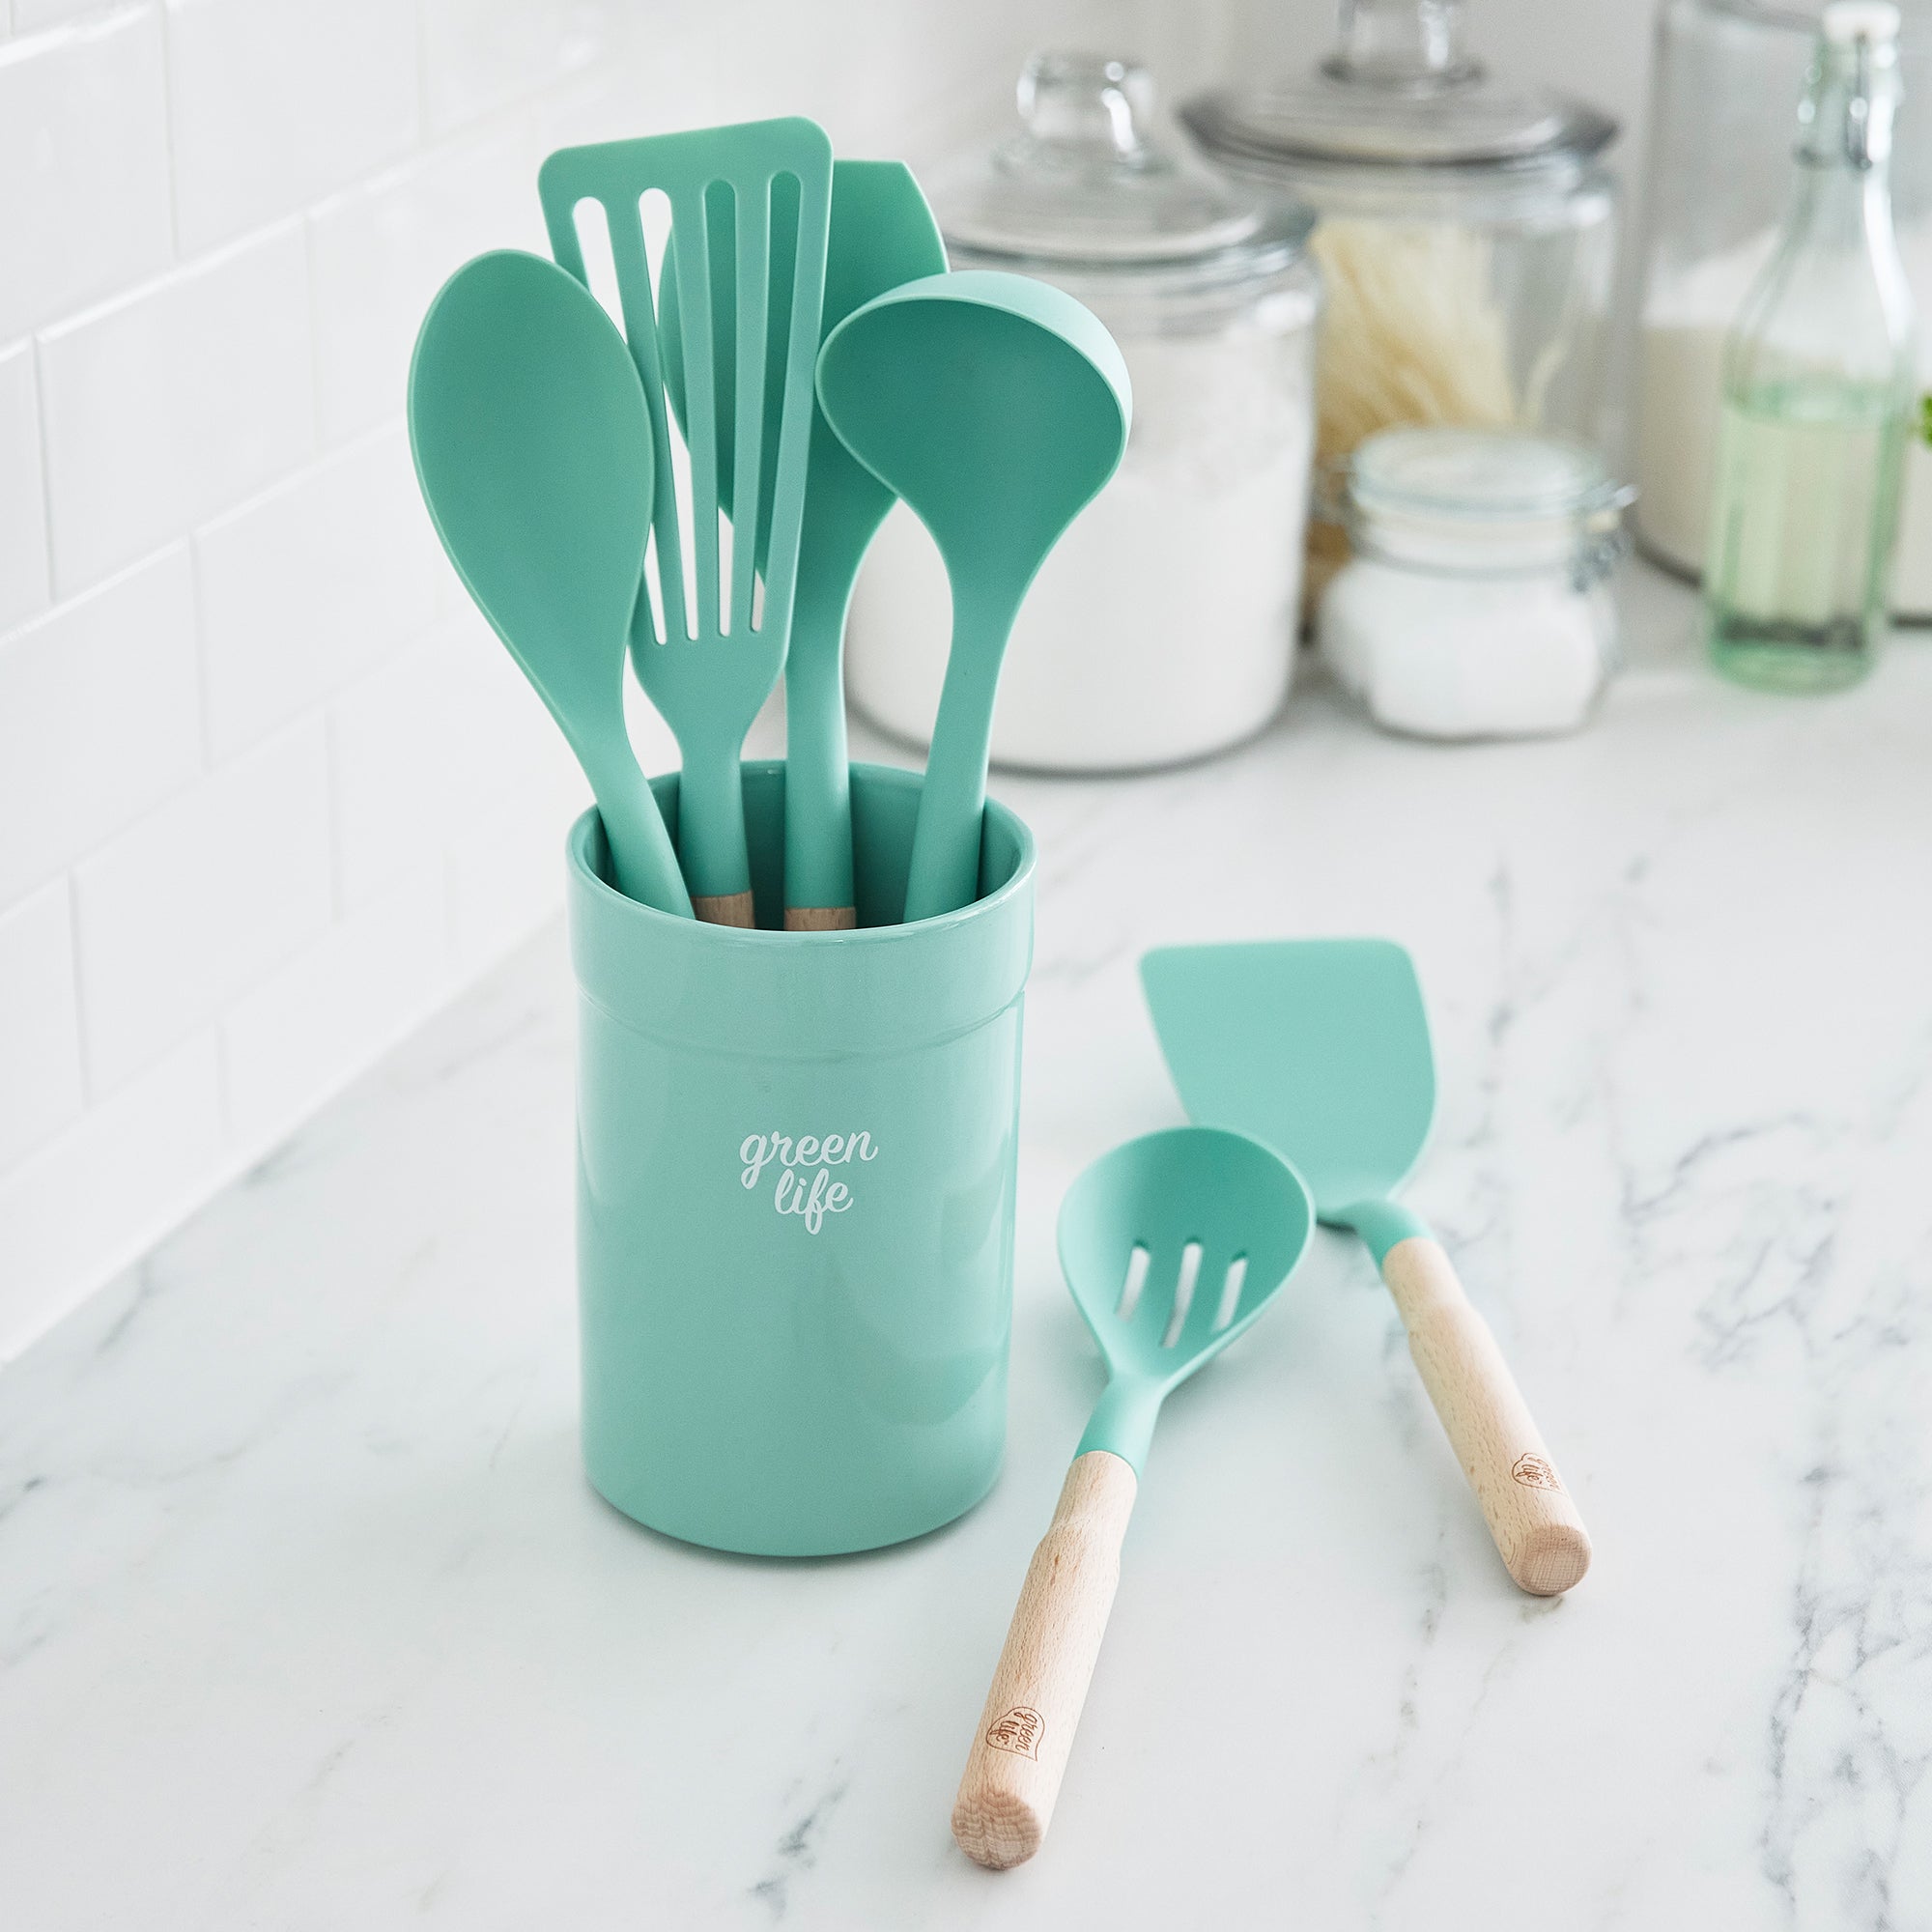 GreenLife Nylon & Wood Cooking Utensils with Ceramic Crock, 7-Piece Set | Turquoise